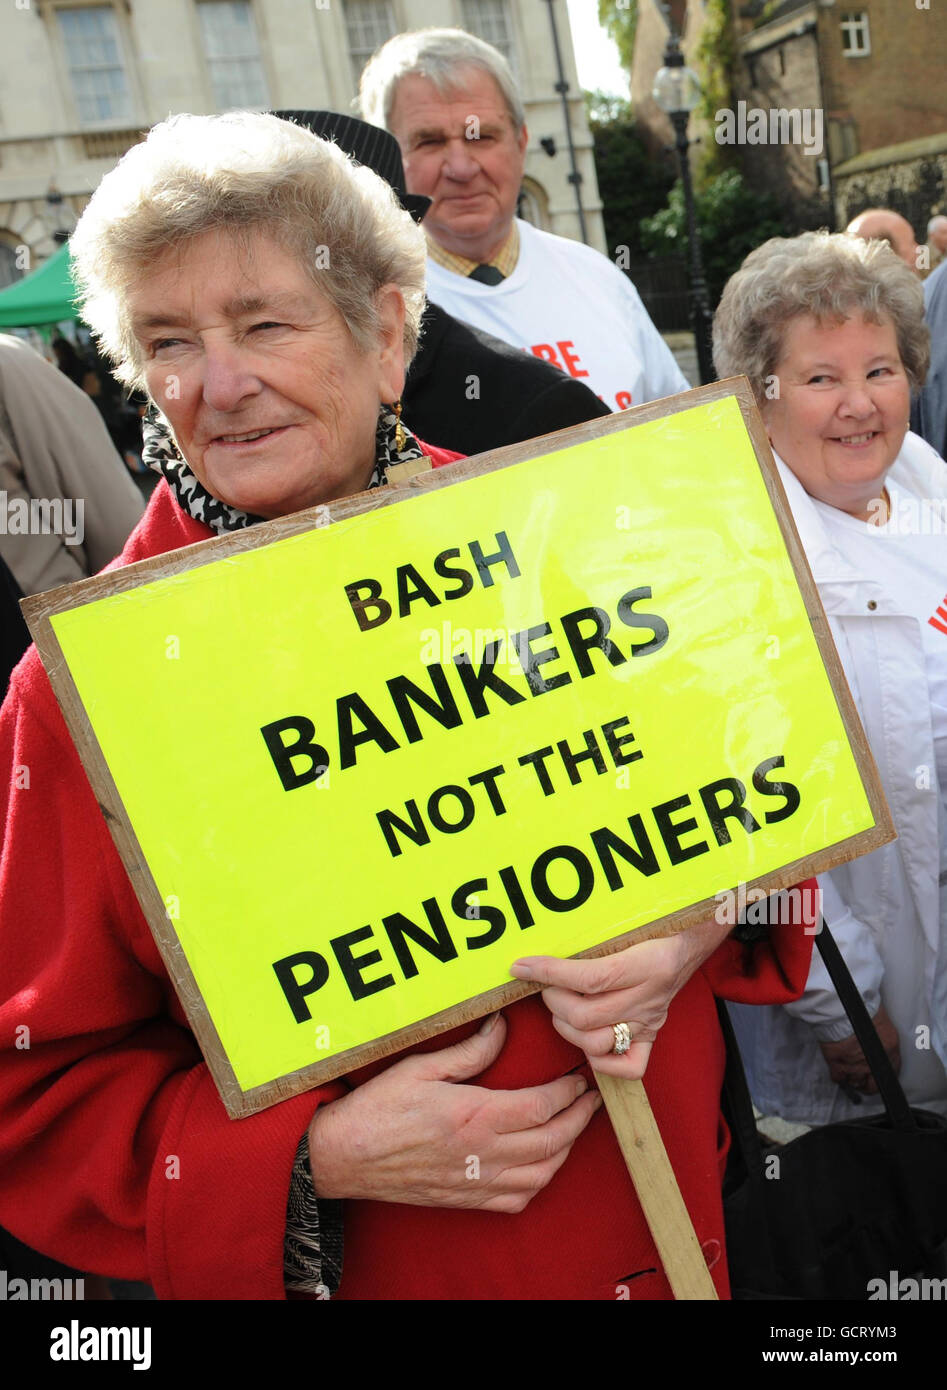 Pension reform. Pensioners in Westminster demonstrate against cuts to pensions, benefits and care services. Stock Photo